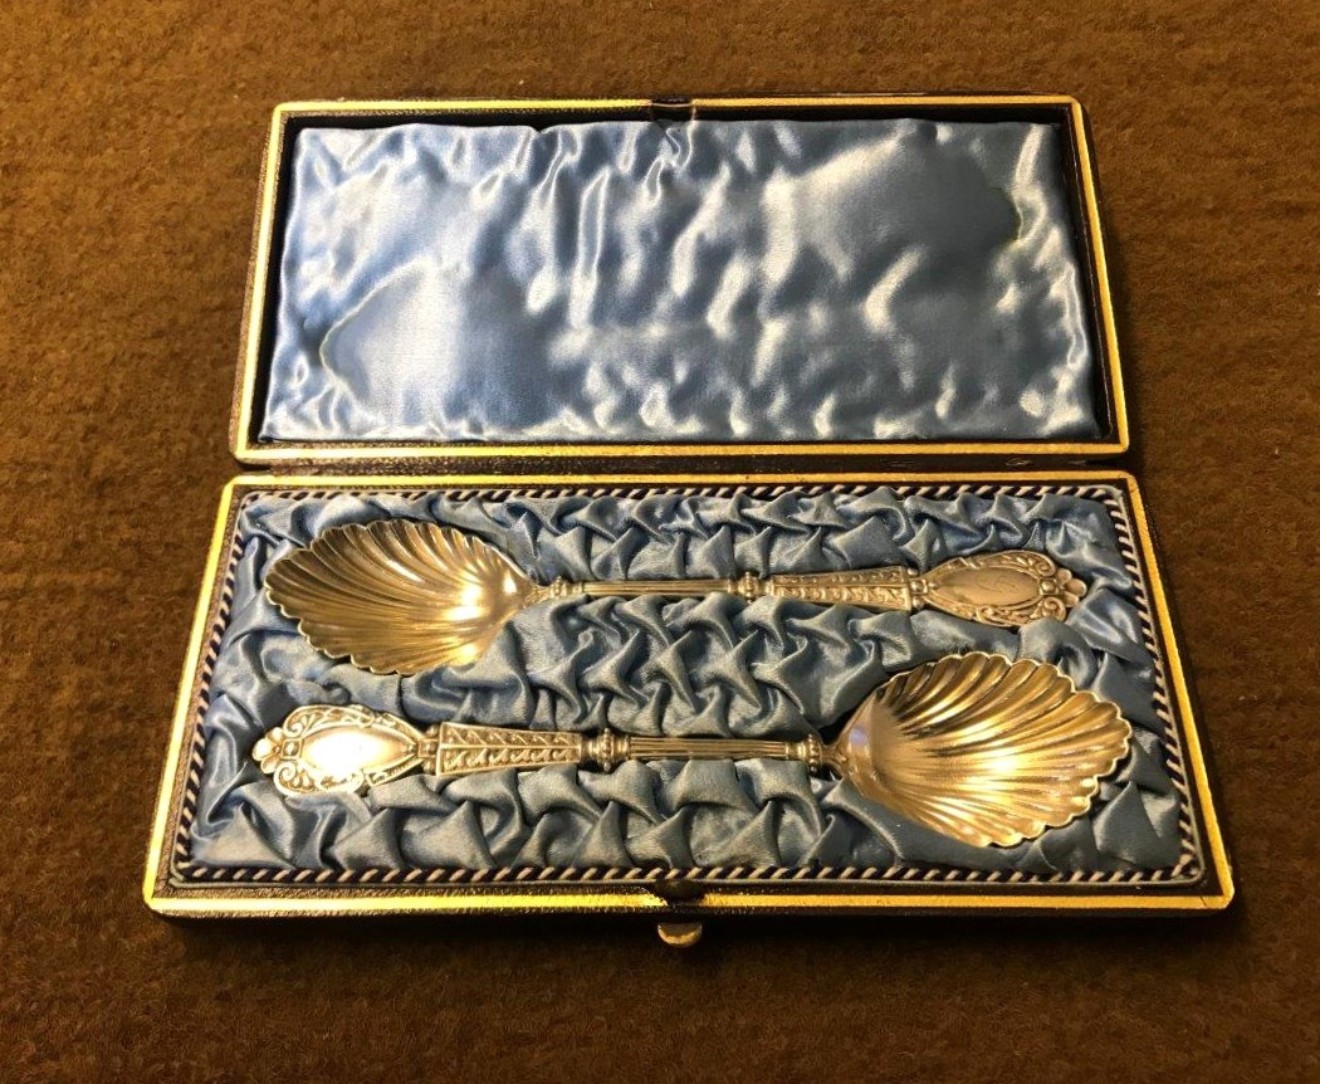 Antique Cased Set of 2 Silver Plated Berry Spoons Monogramed G